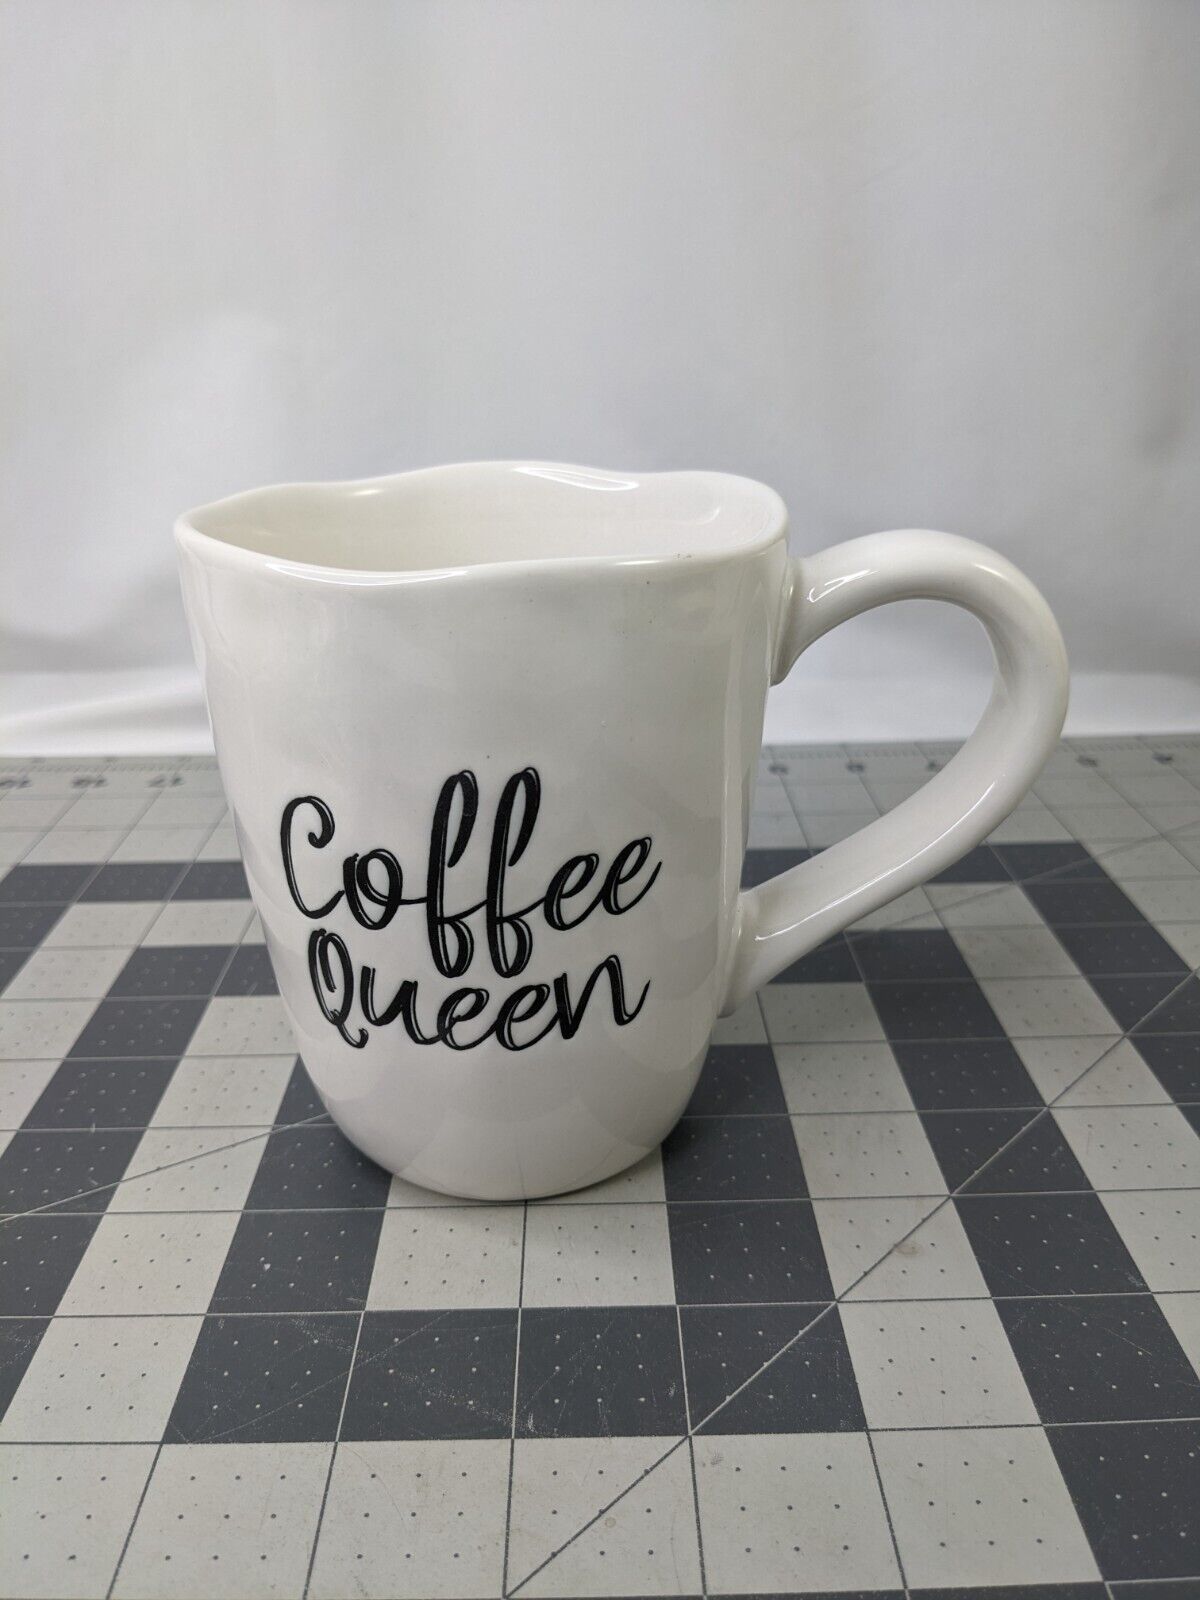 Pier 1 Imports Coffee Queen Mug Cup Stoneware